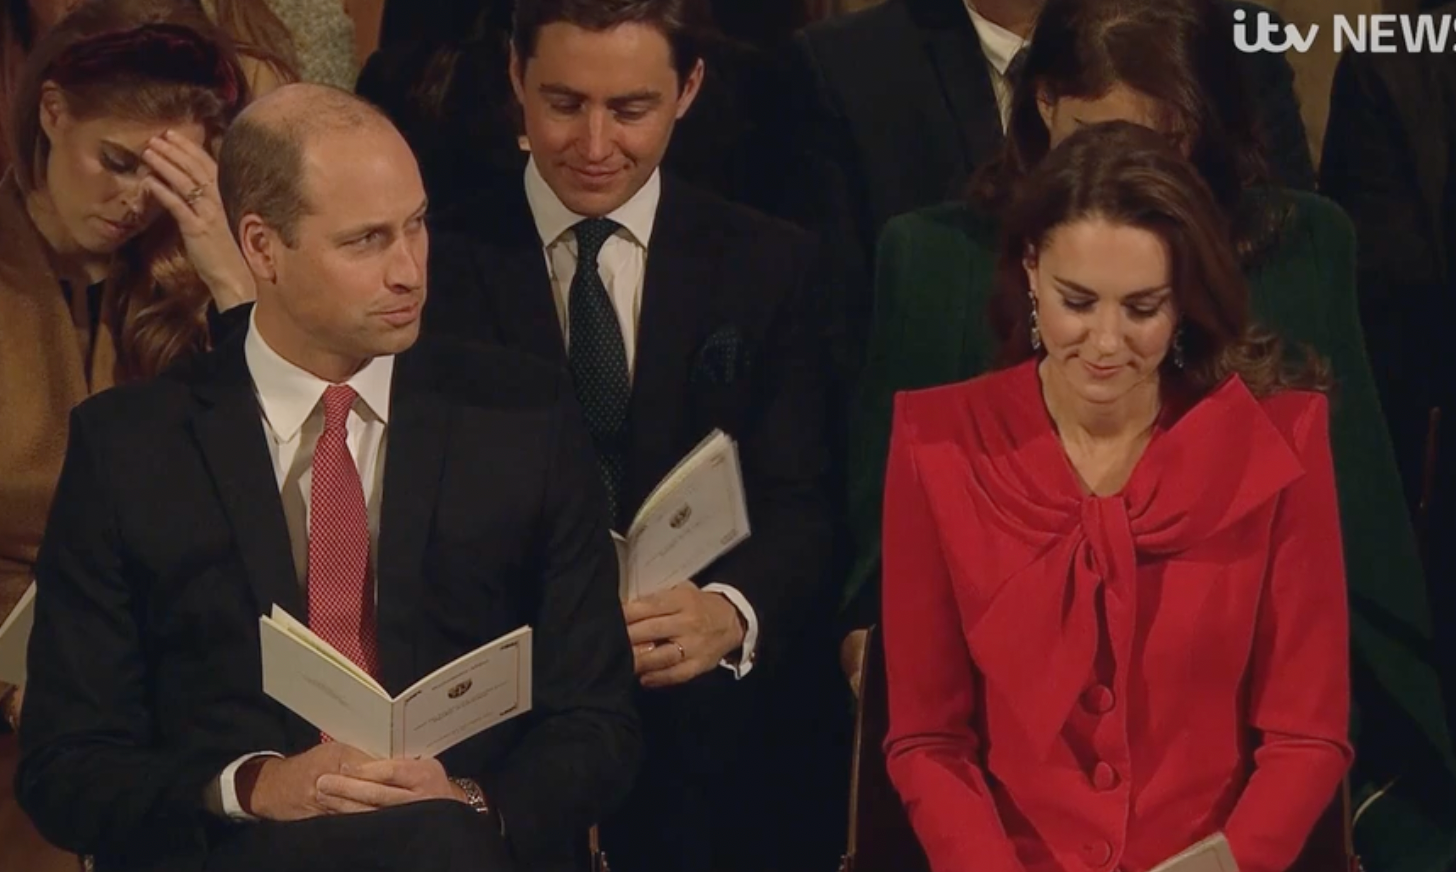 Take a look at the romantic moment of Duchess Catherine and Prince William that the cameras managed to capture (VIDEO)